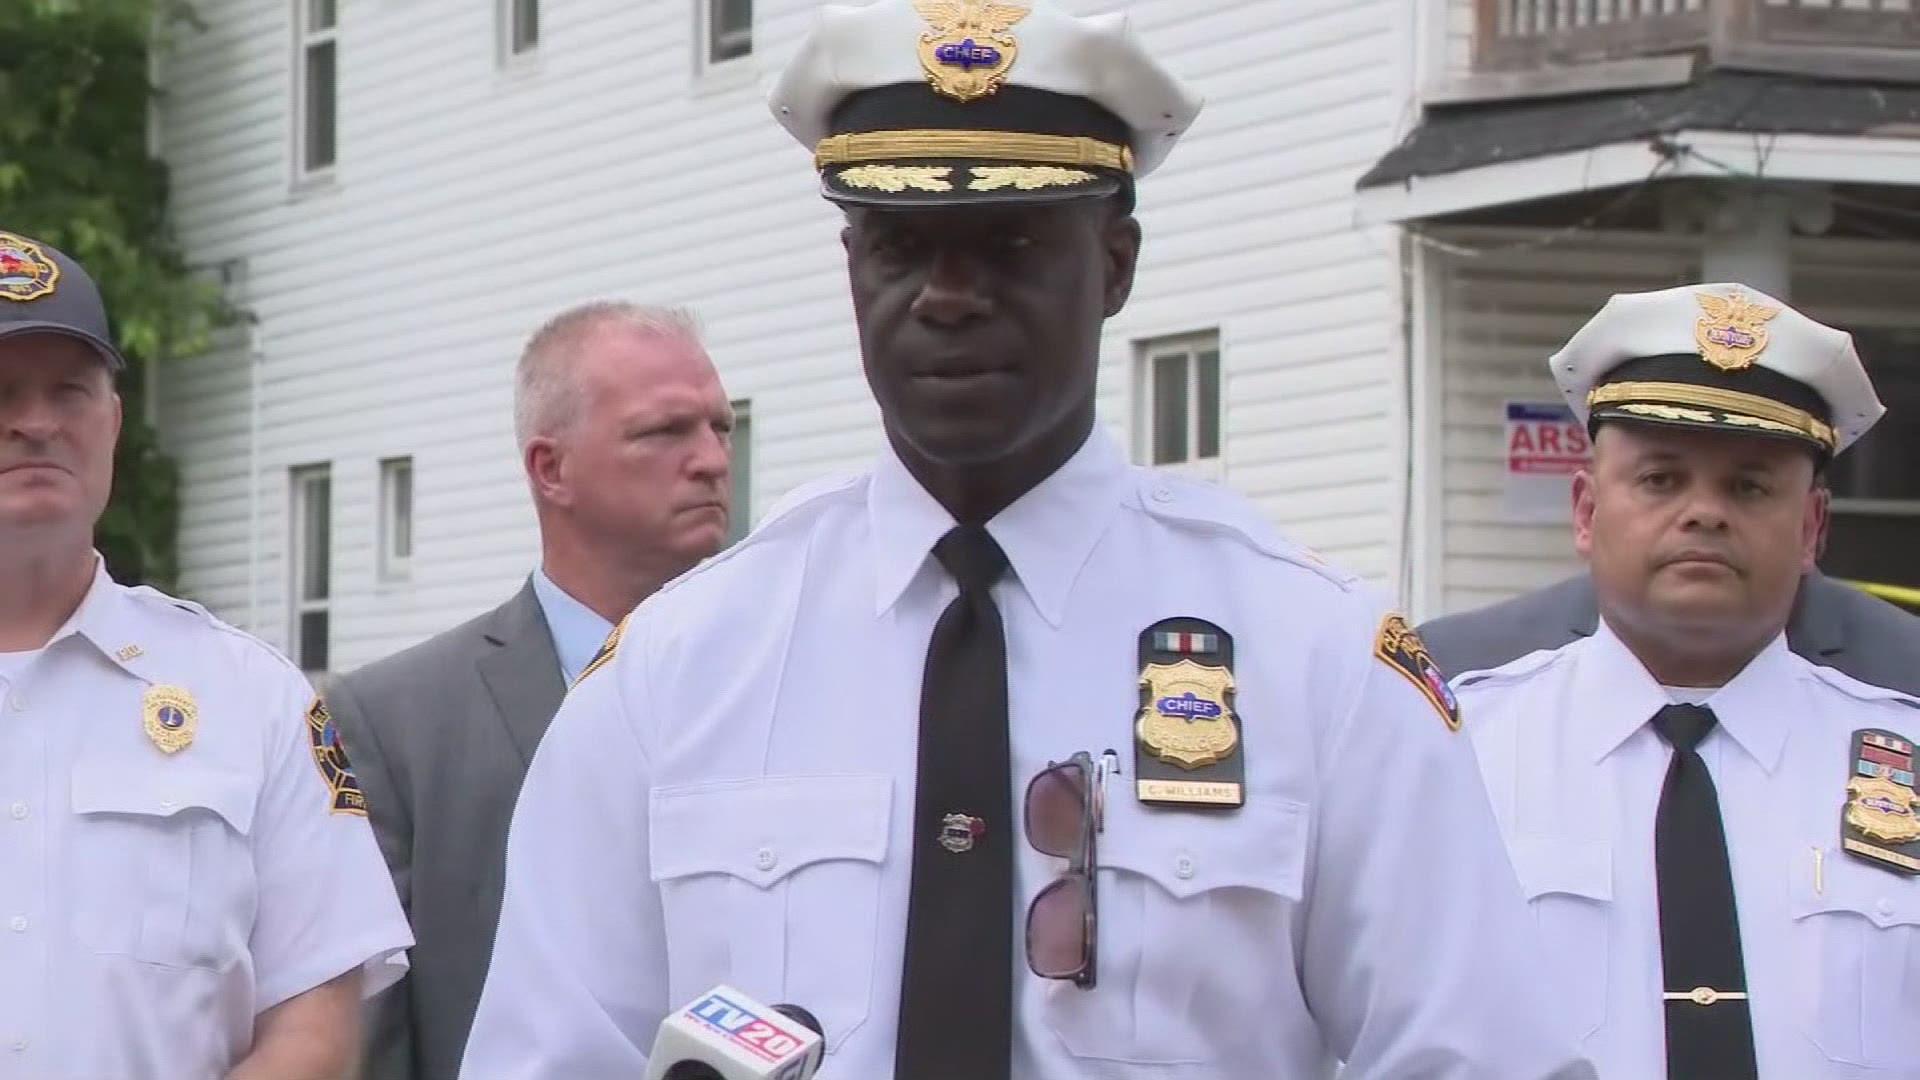 Cleveland Police Chief Calvin Williams discusses the arrest of Armond Johnson for a quadruple homicide in the Slavic Village neighborhood.